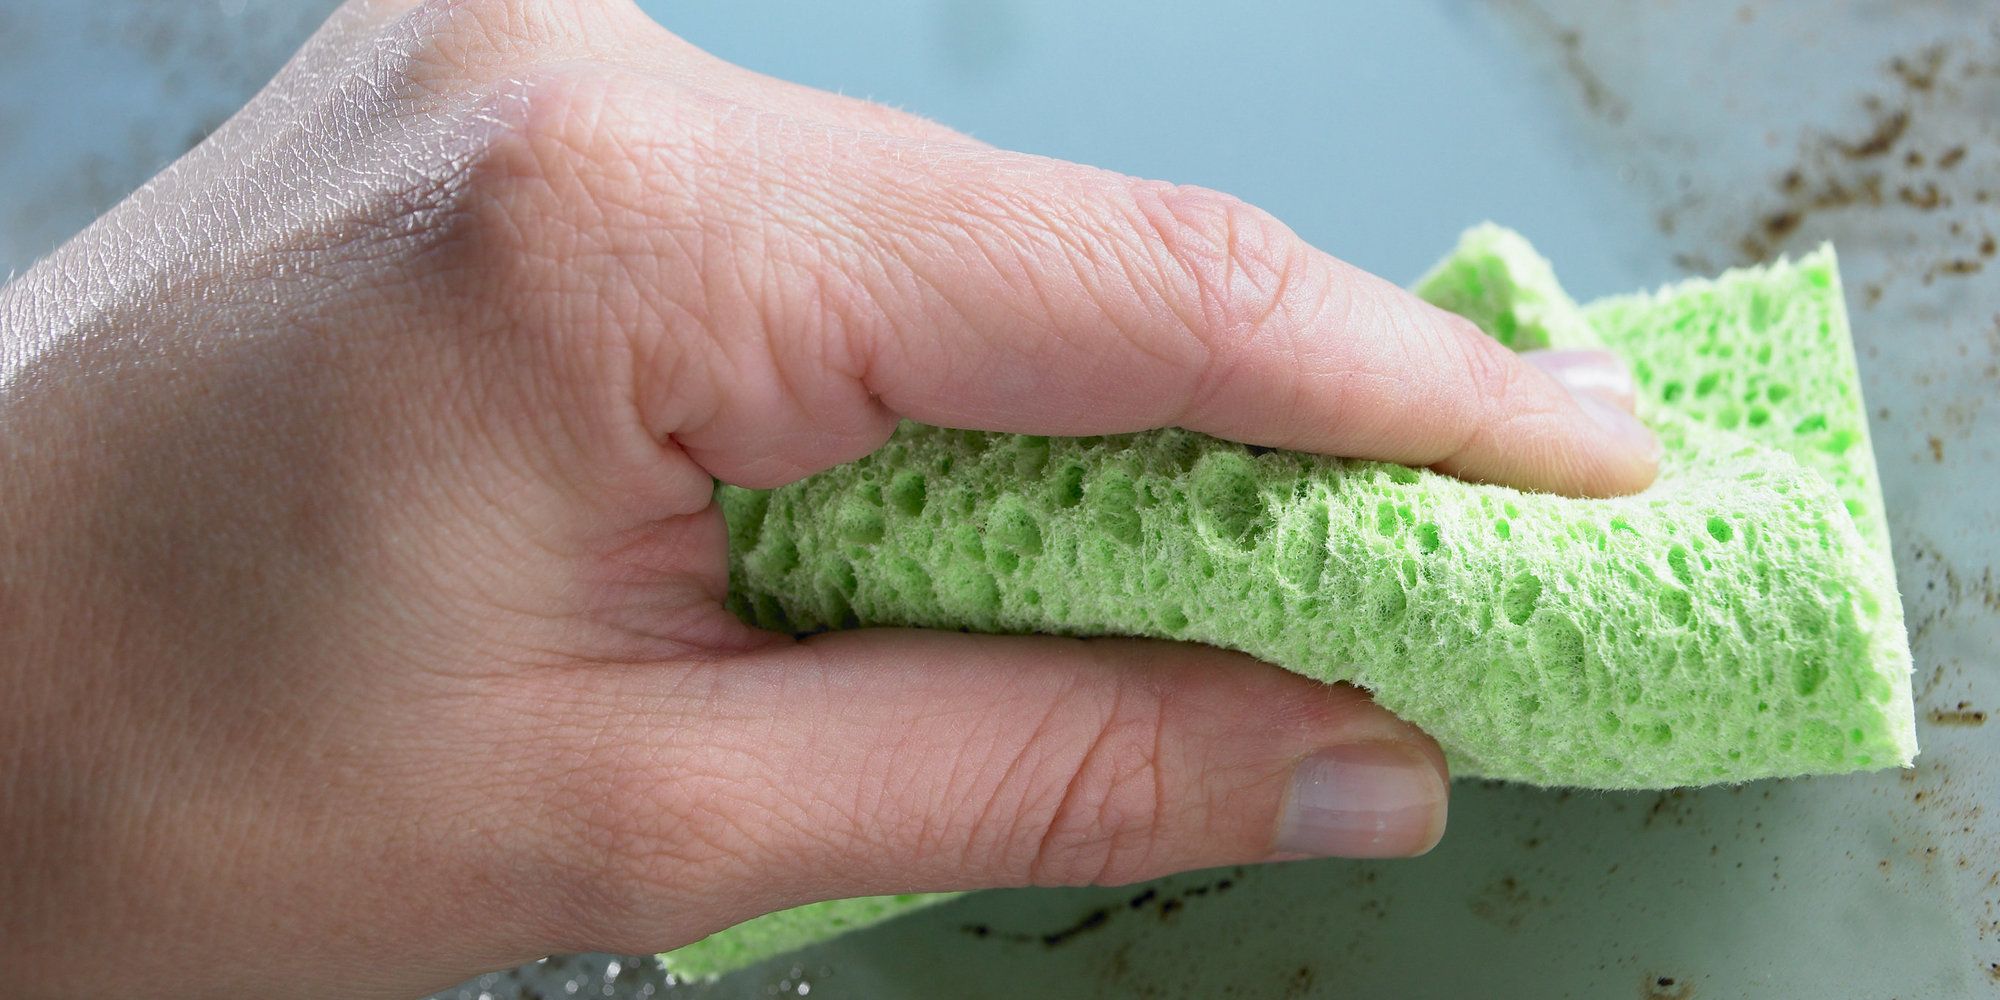 How To Clean And Disinfect A Kitchen Sponge